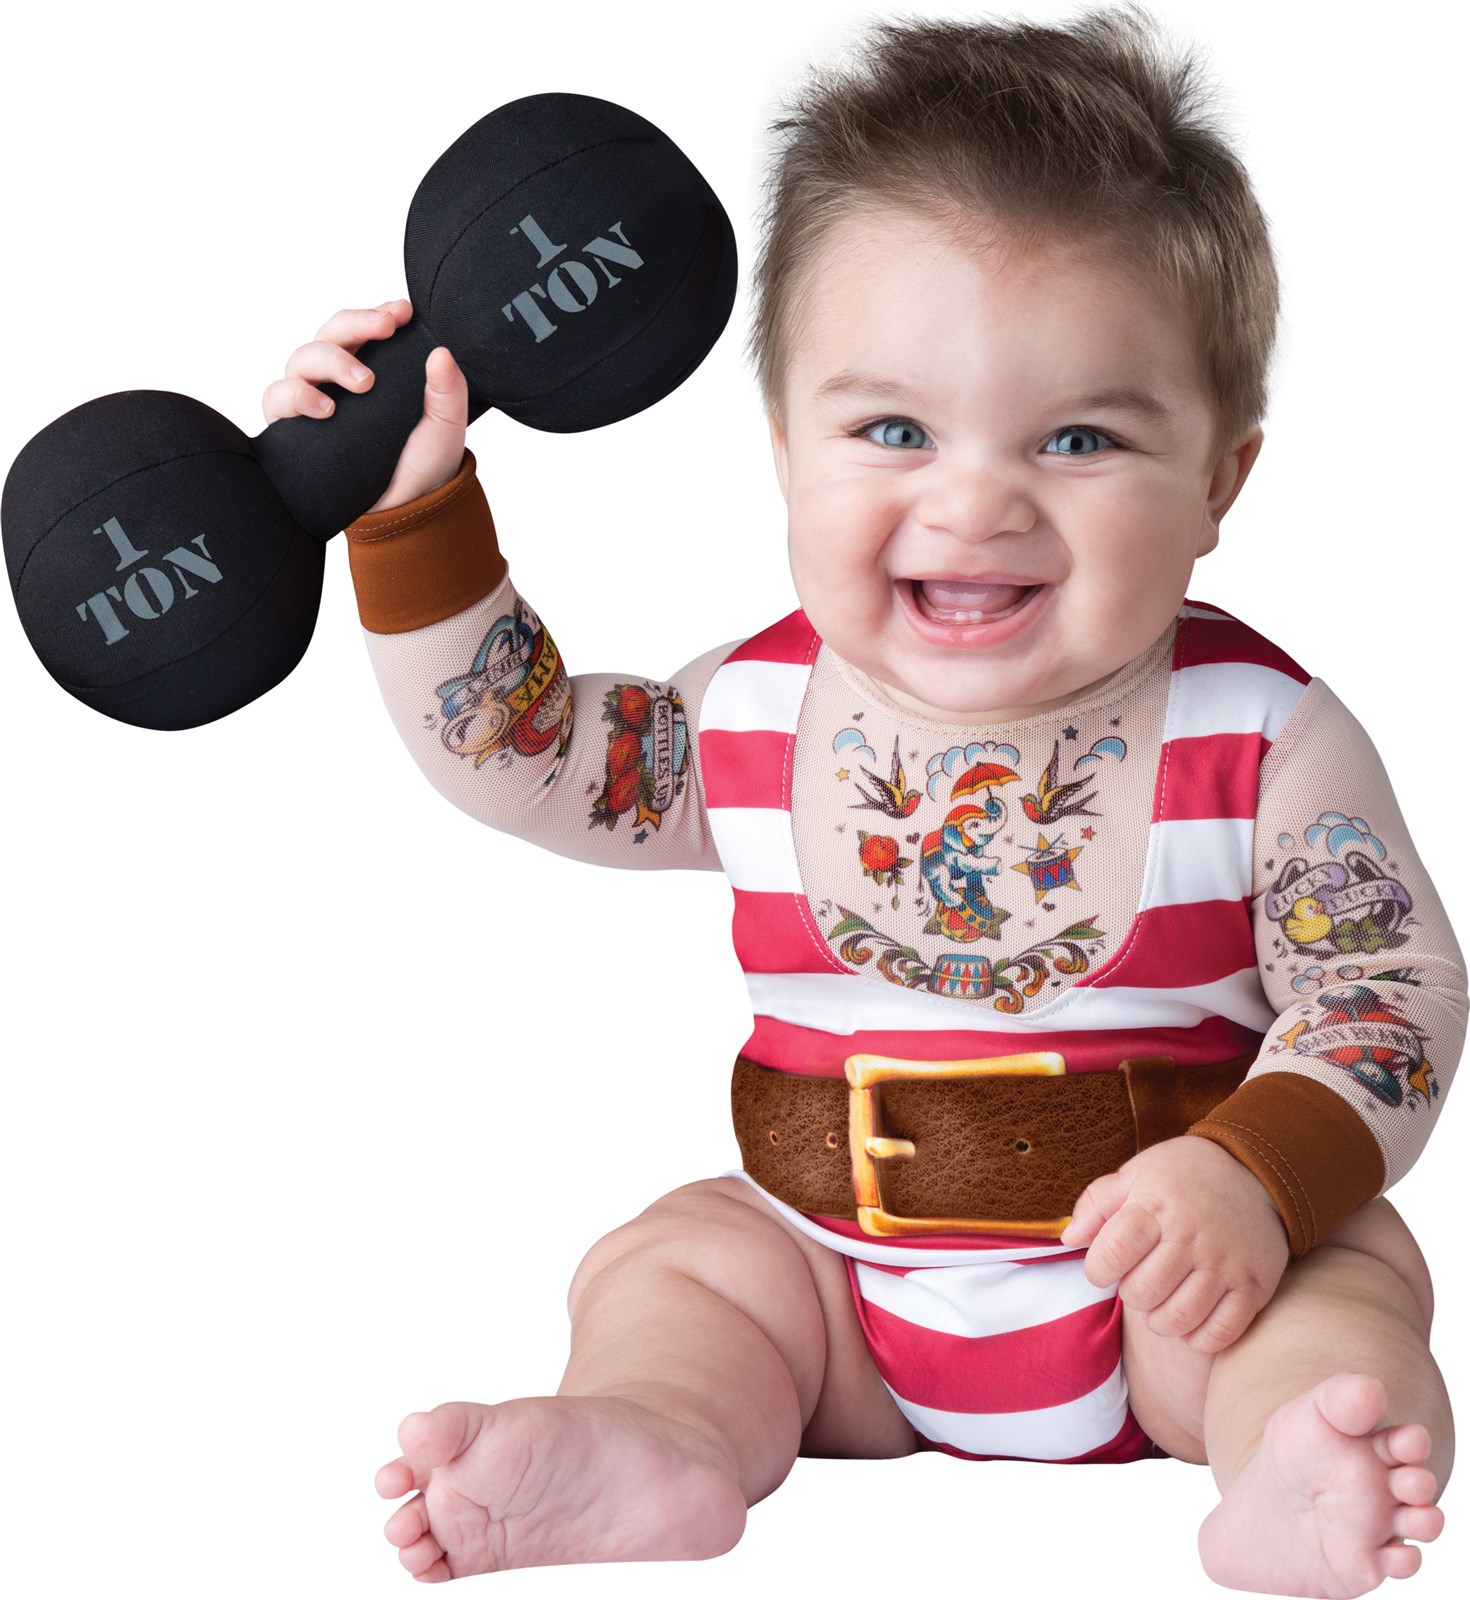 Silly Baby Strongman Costume